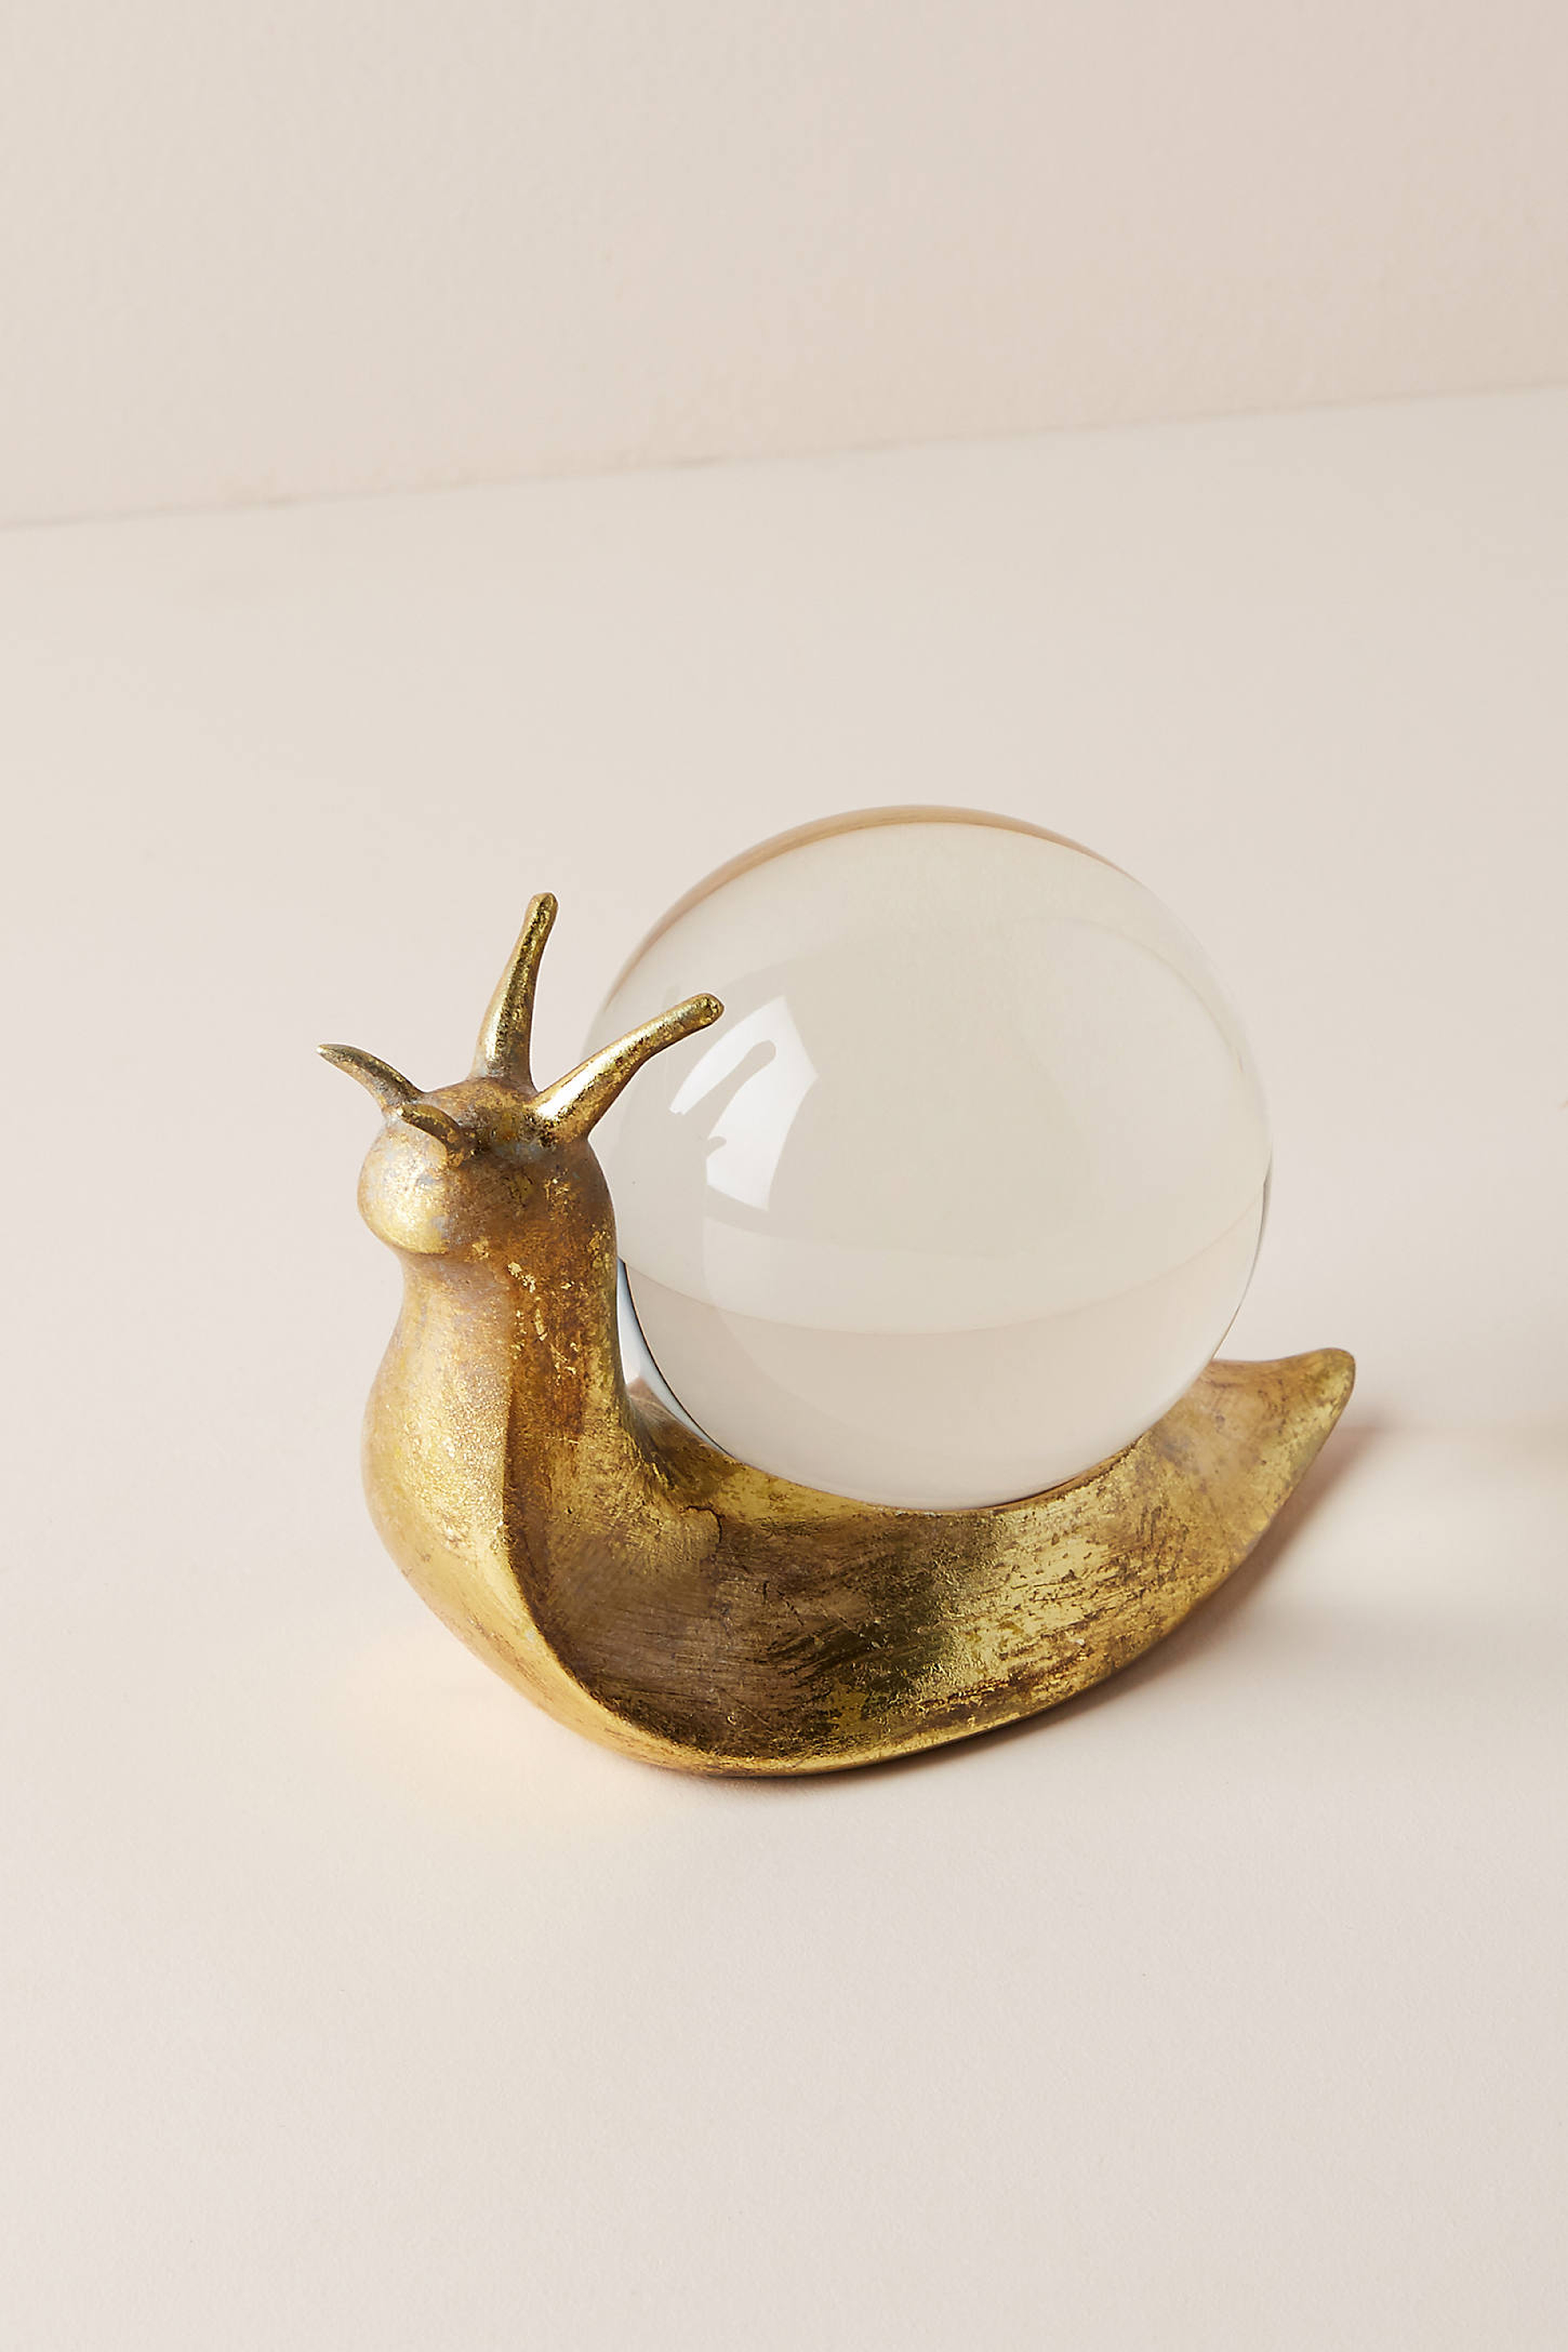 Snail Orb Decorative Object By Anthropologie in Gold - Anthropologie